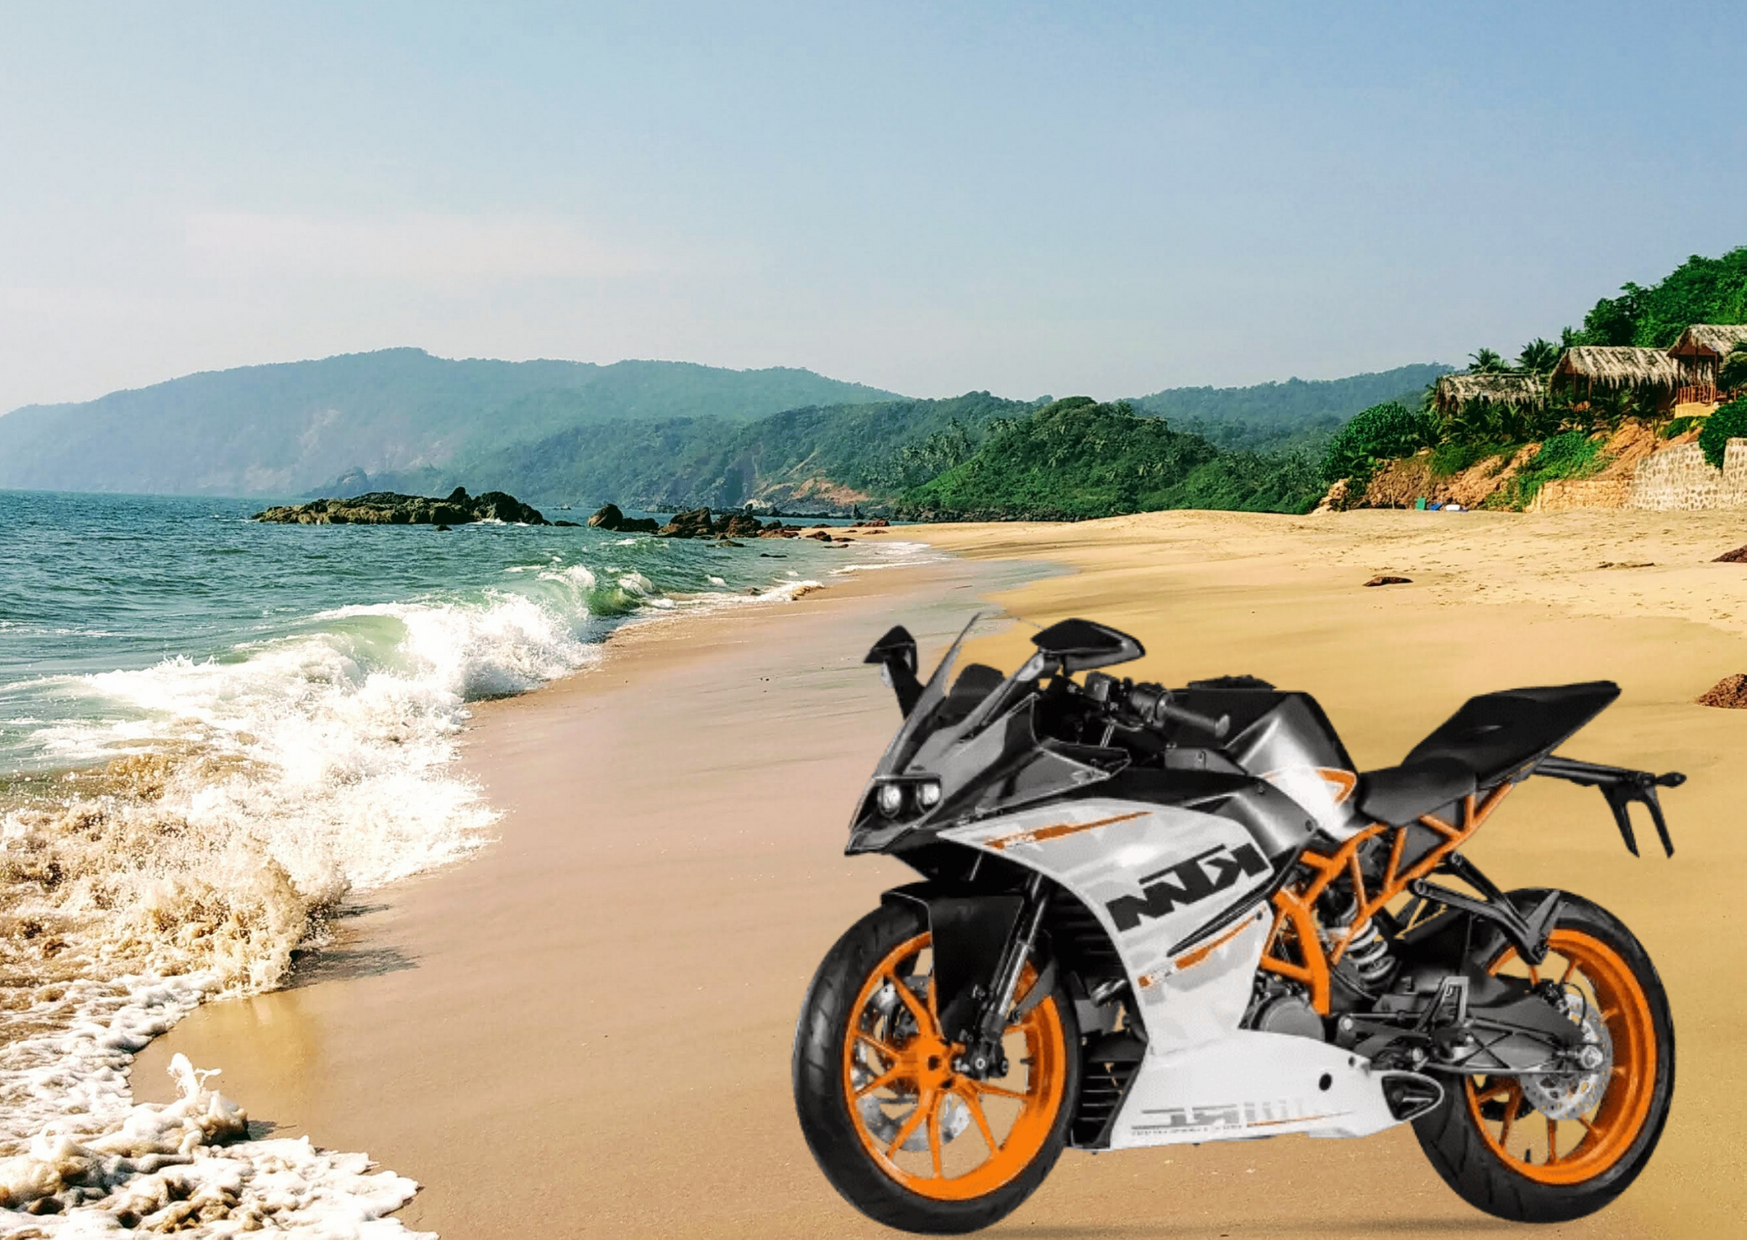 Get Your Bike Hire In Goa And Visit All The Nooks And Corners